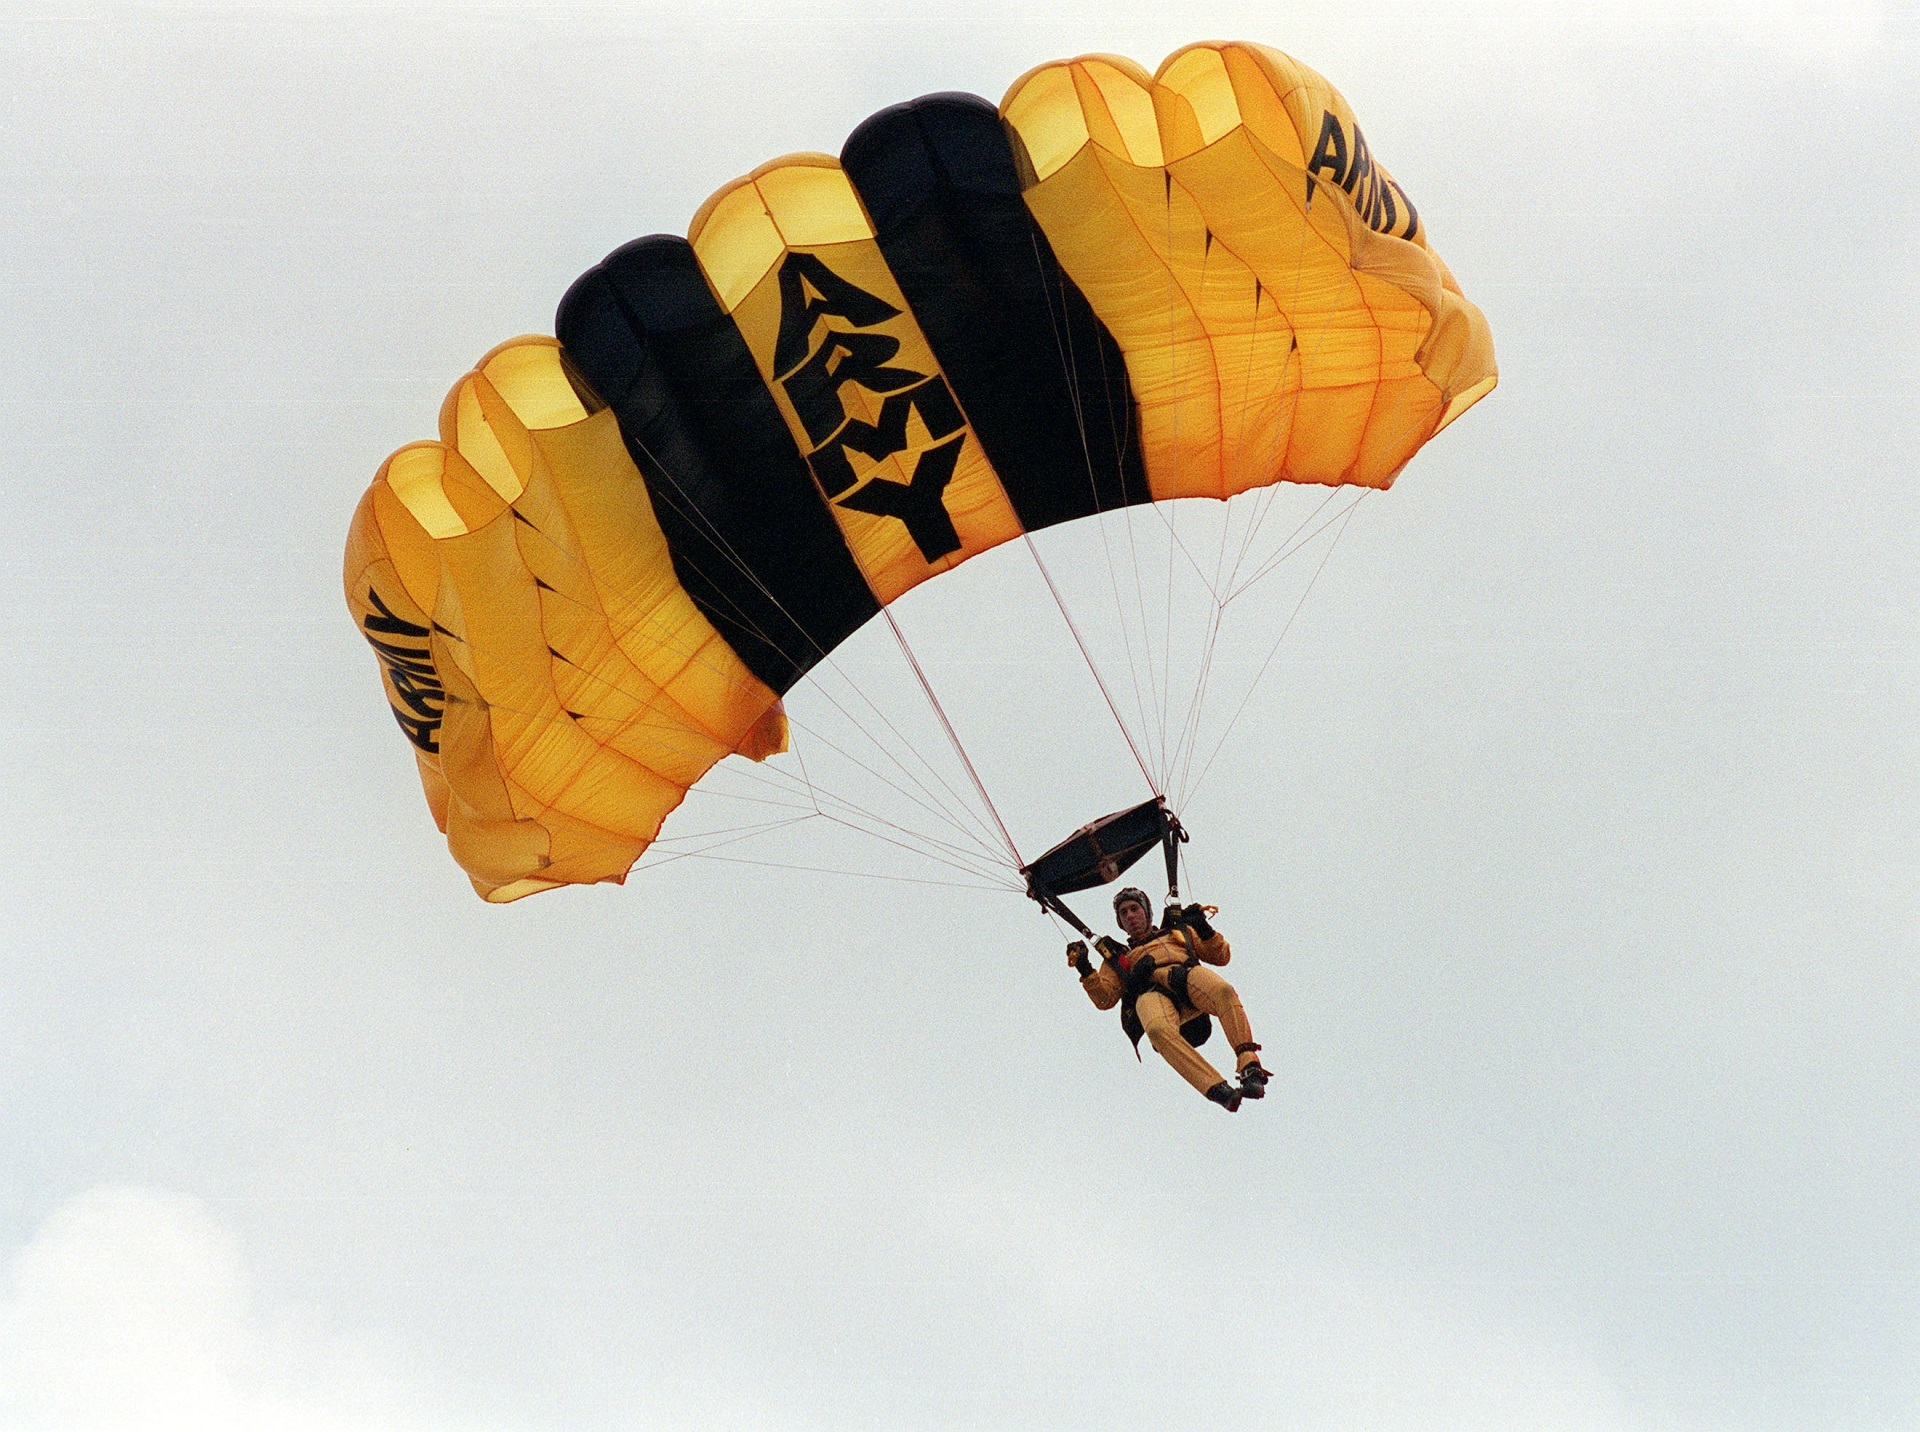 Military skydiver photo